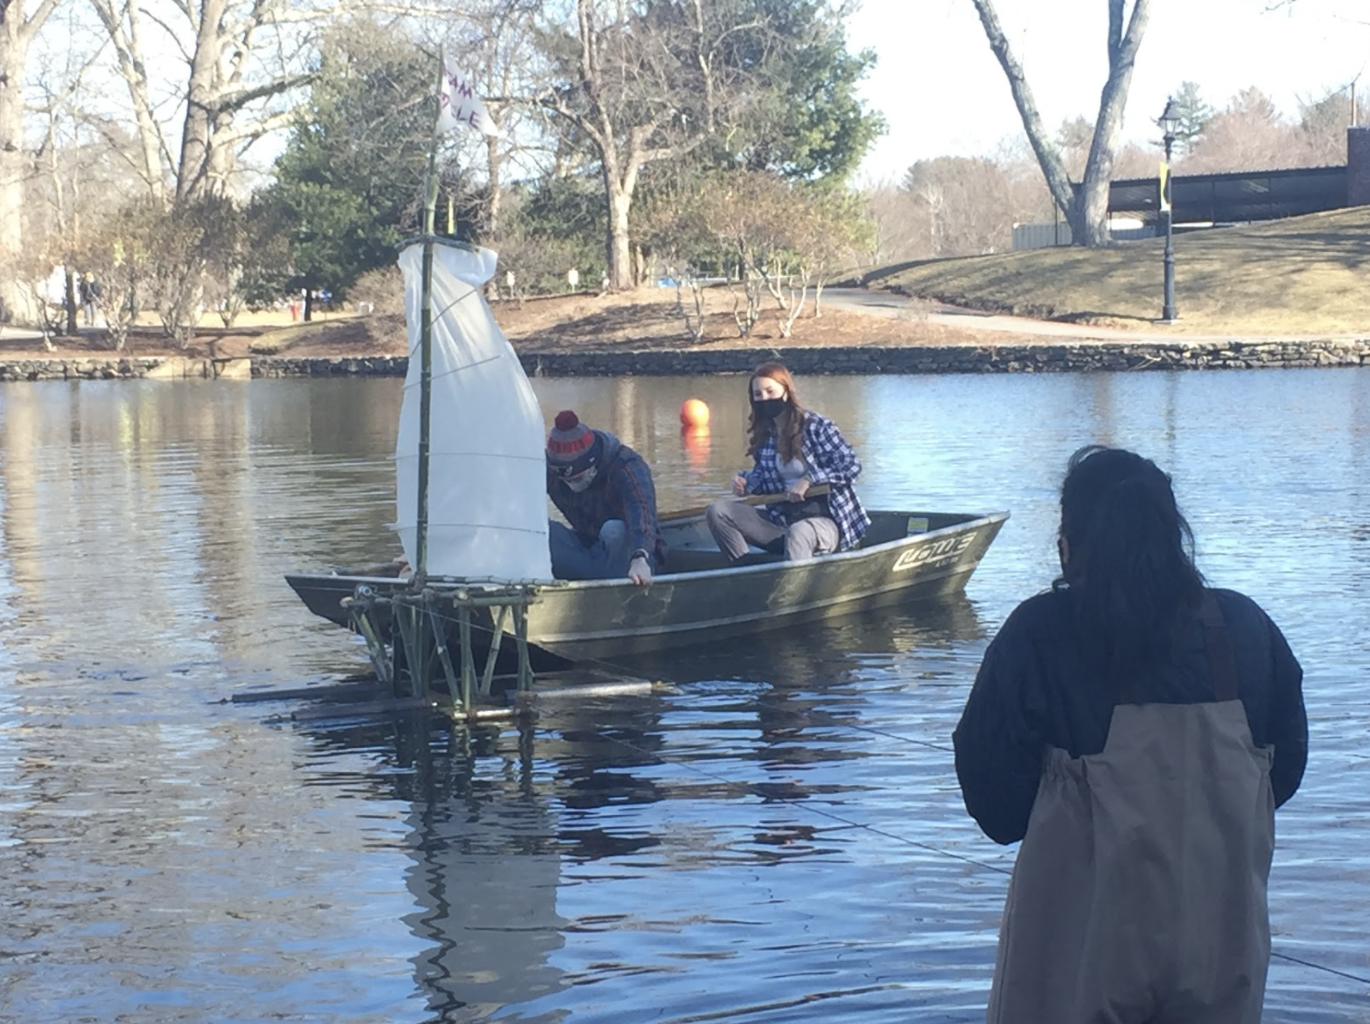 Students in the Public Art class assist by untangling the wires of a bamboo boat